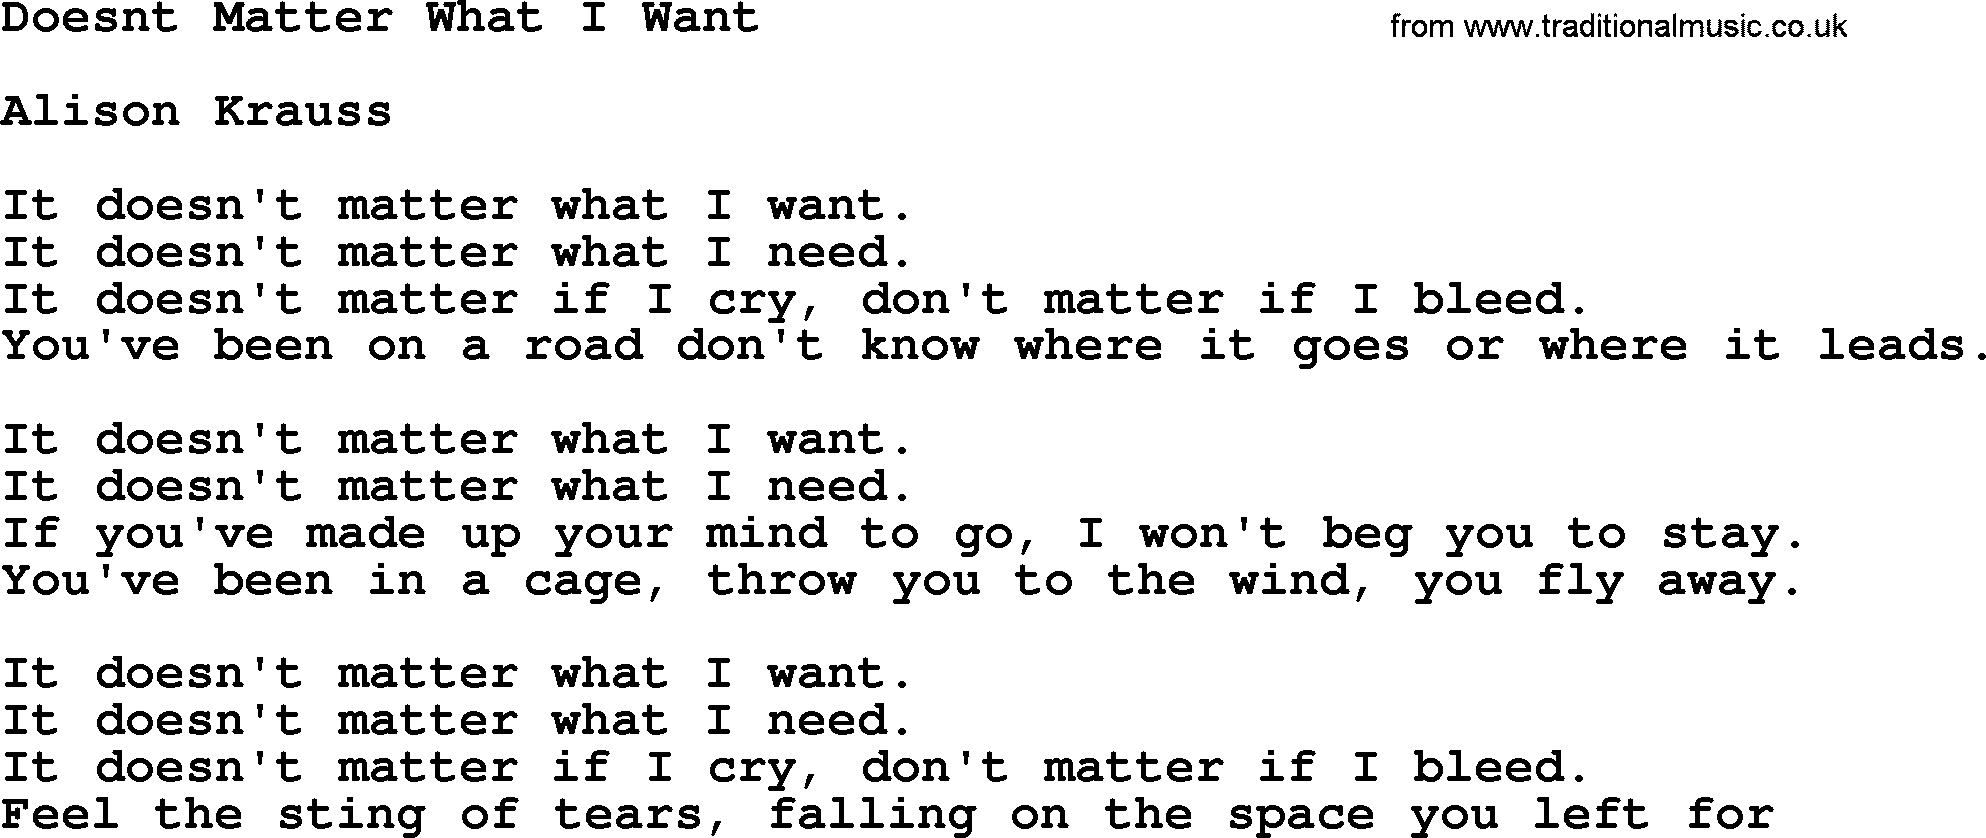 Bluegrass song: Doesnt Matter What I Want, lyrics and chords